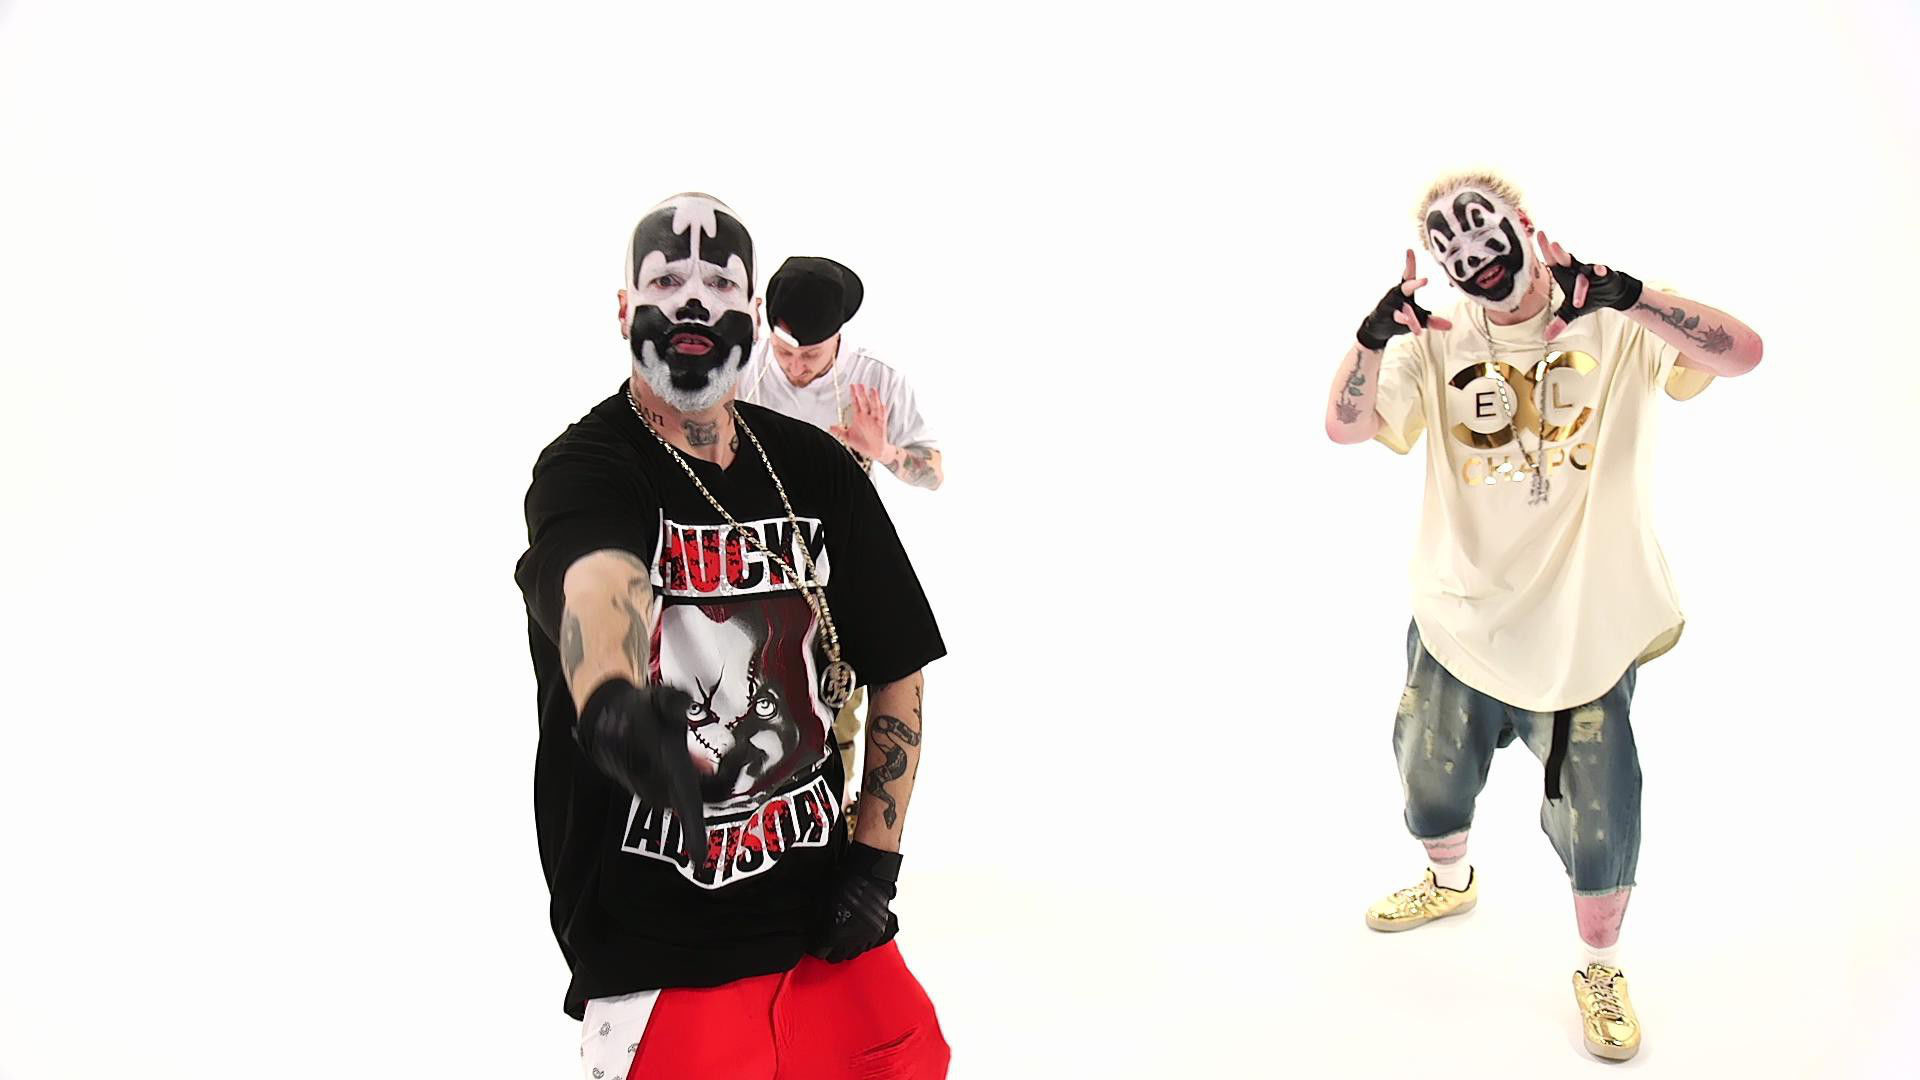 1920x1080 related wallpaper Source Â· 6 Foot 7 Foot 7 Foot 8 Foot feat Lyte by Insane  Clown Posse on